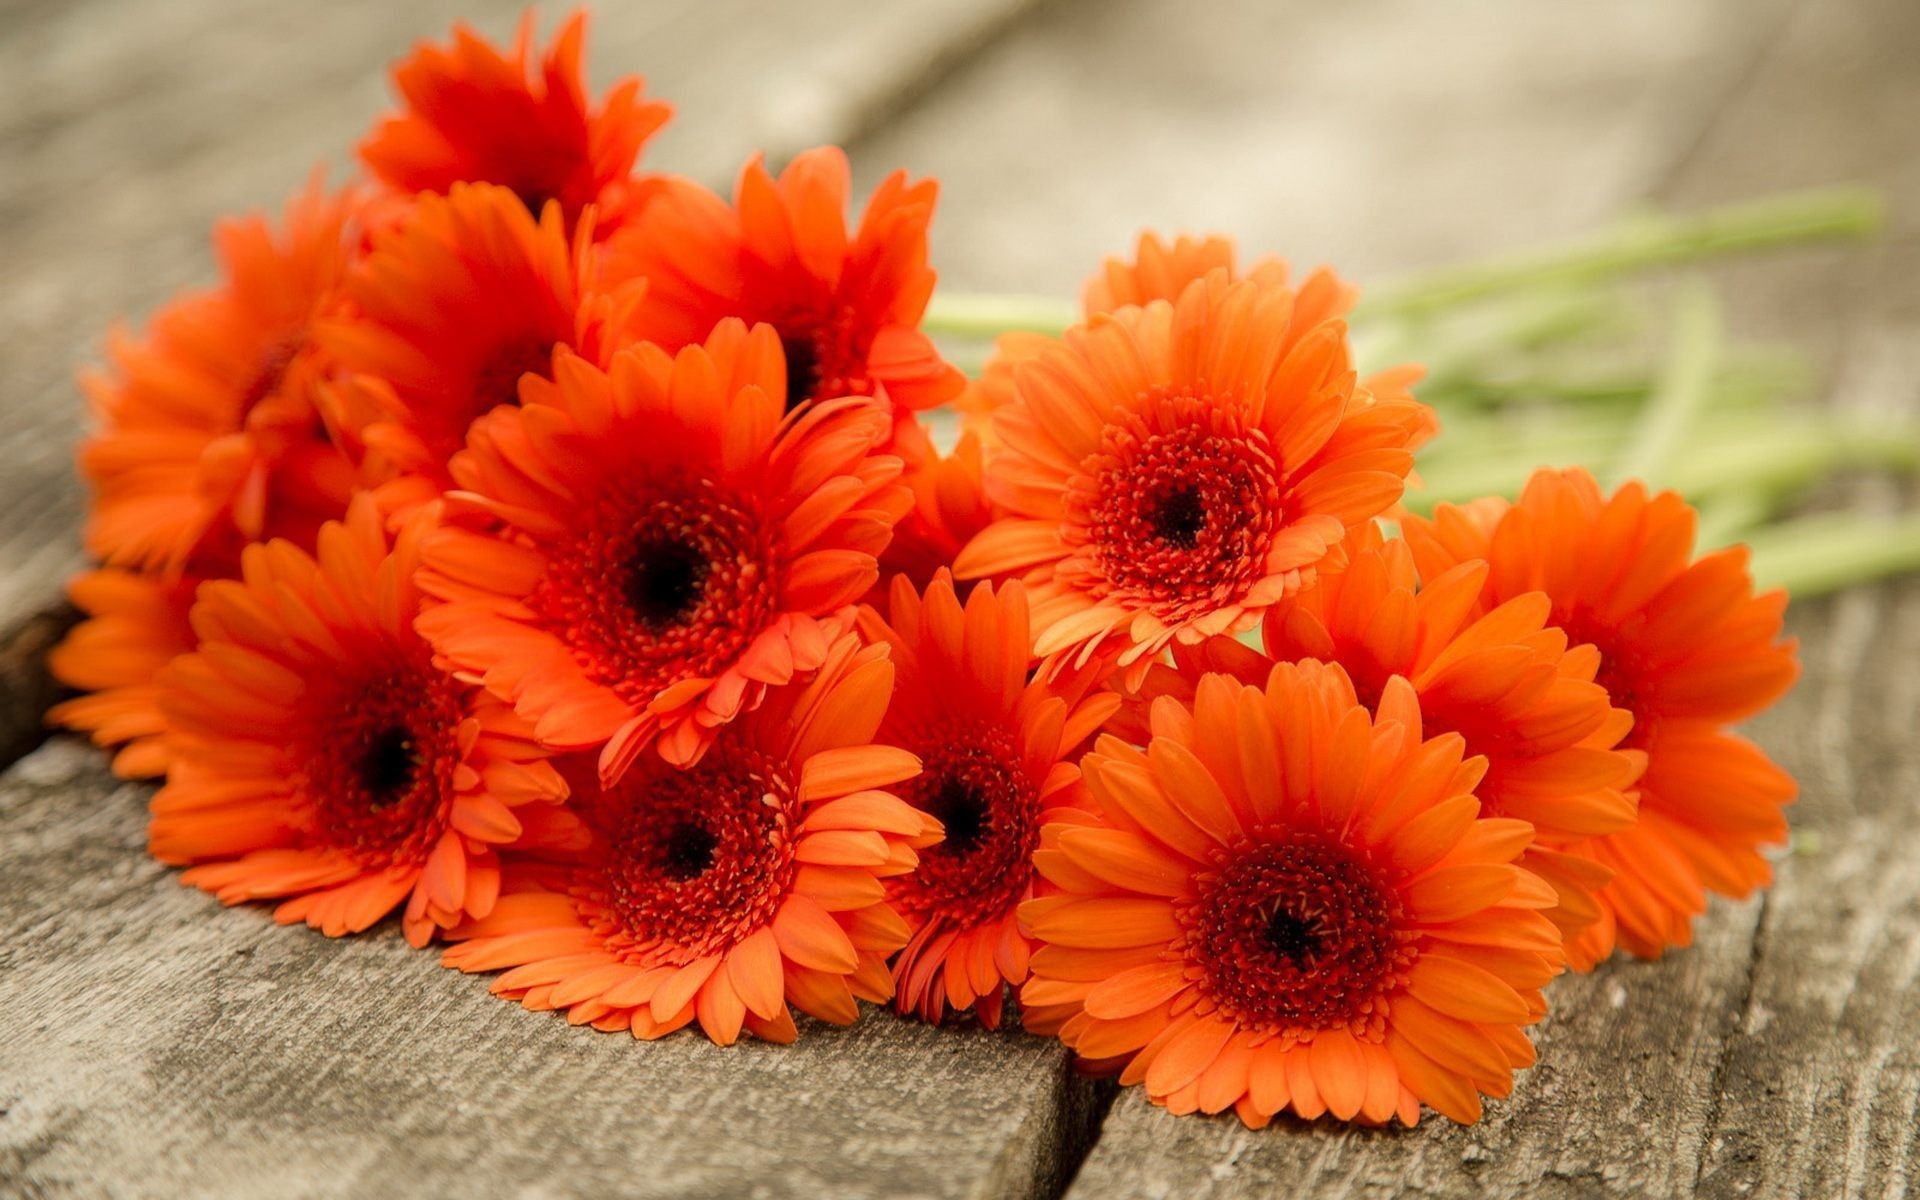 Gerbera Daisy: Commonly grown for their bright and cheerful daisy-like flowers. 1920x1200 HD Wallpaper.